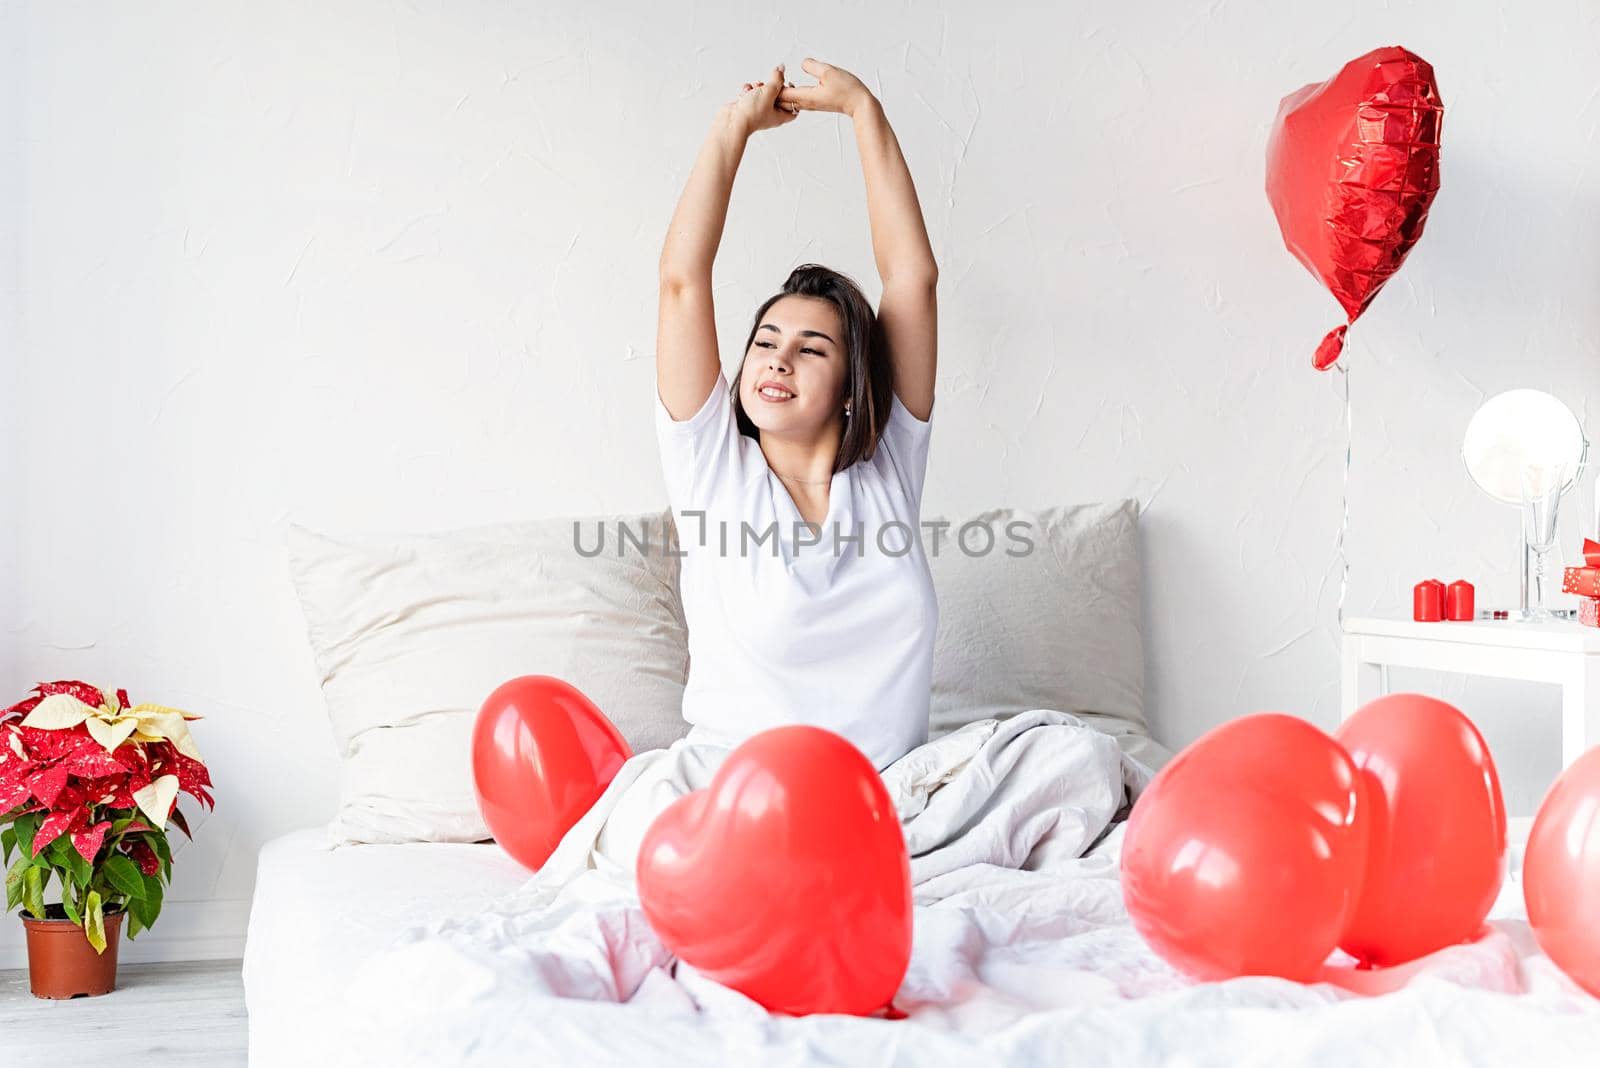 Valentine's Day. Sleeping. Young happy brunette woman sitting awake in the bed with red heart shaped balloons